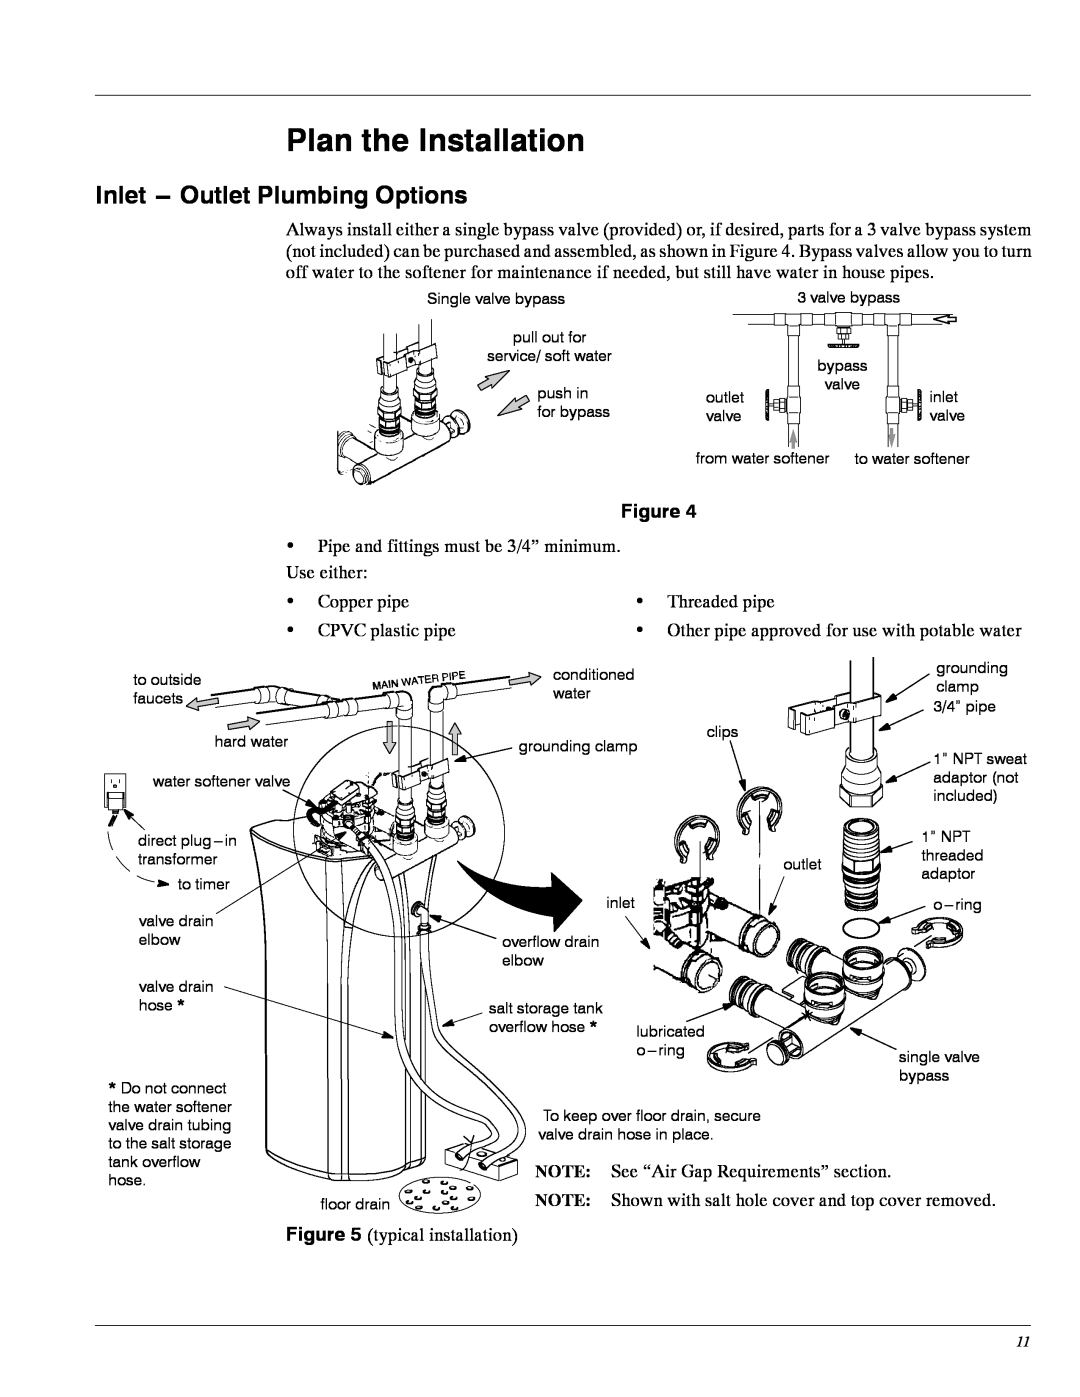 Whirlpool WHES20 manual Plan the Installation, Inlet ---Outlet Plumbing Options, Figure, See “Air Gap Requirements” section 